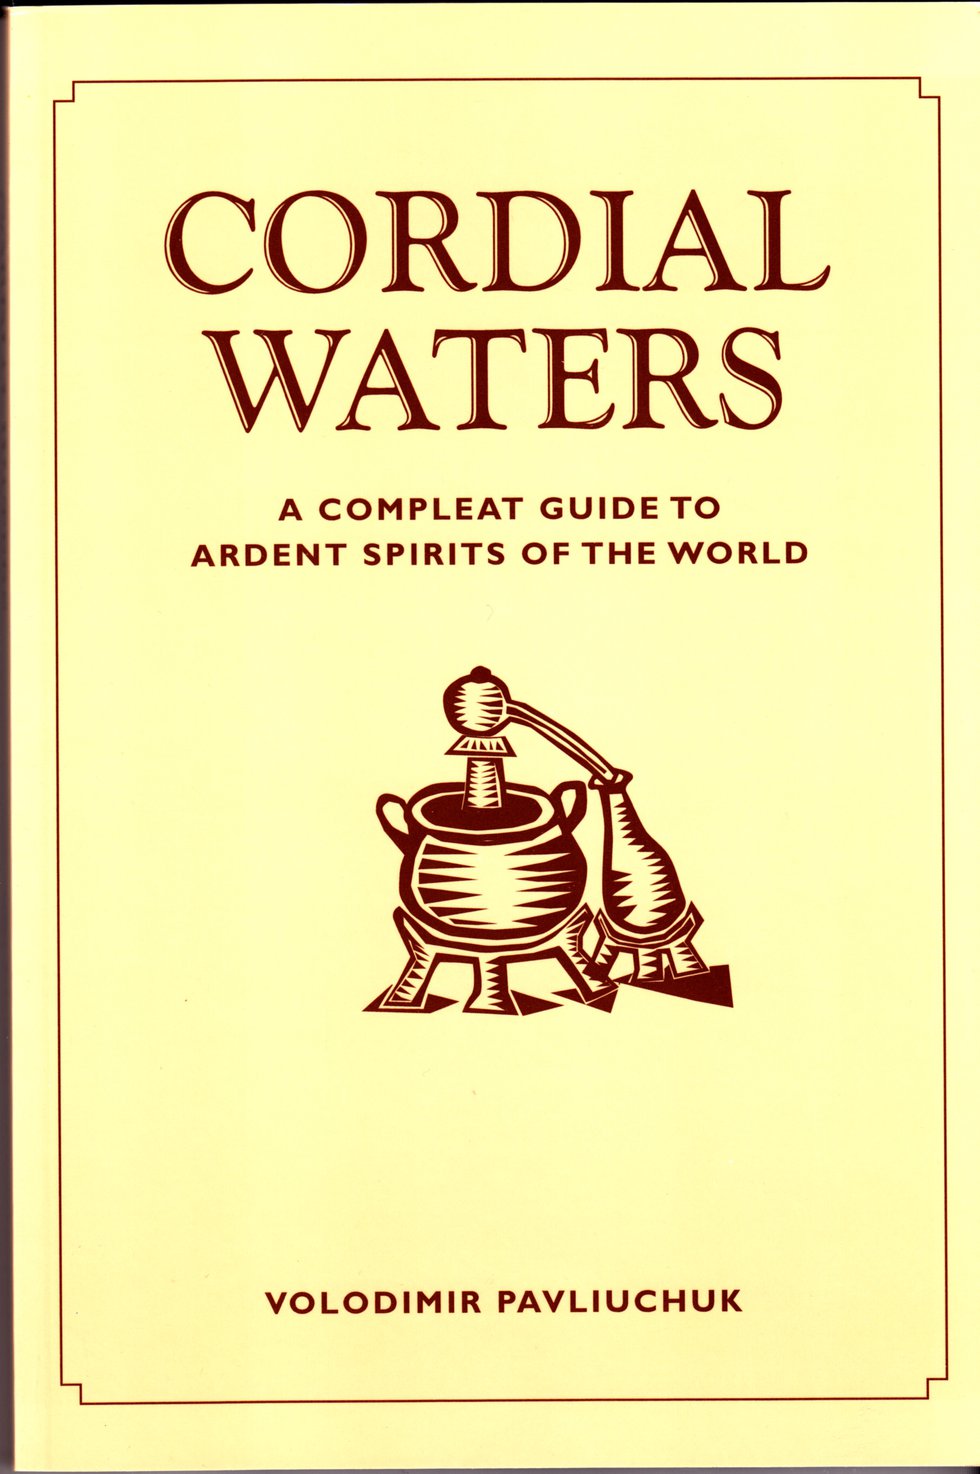 Cordial Waters: A Compleat Guide to Ardent Spirits of the World by Volodimir Pavliuchuk